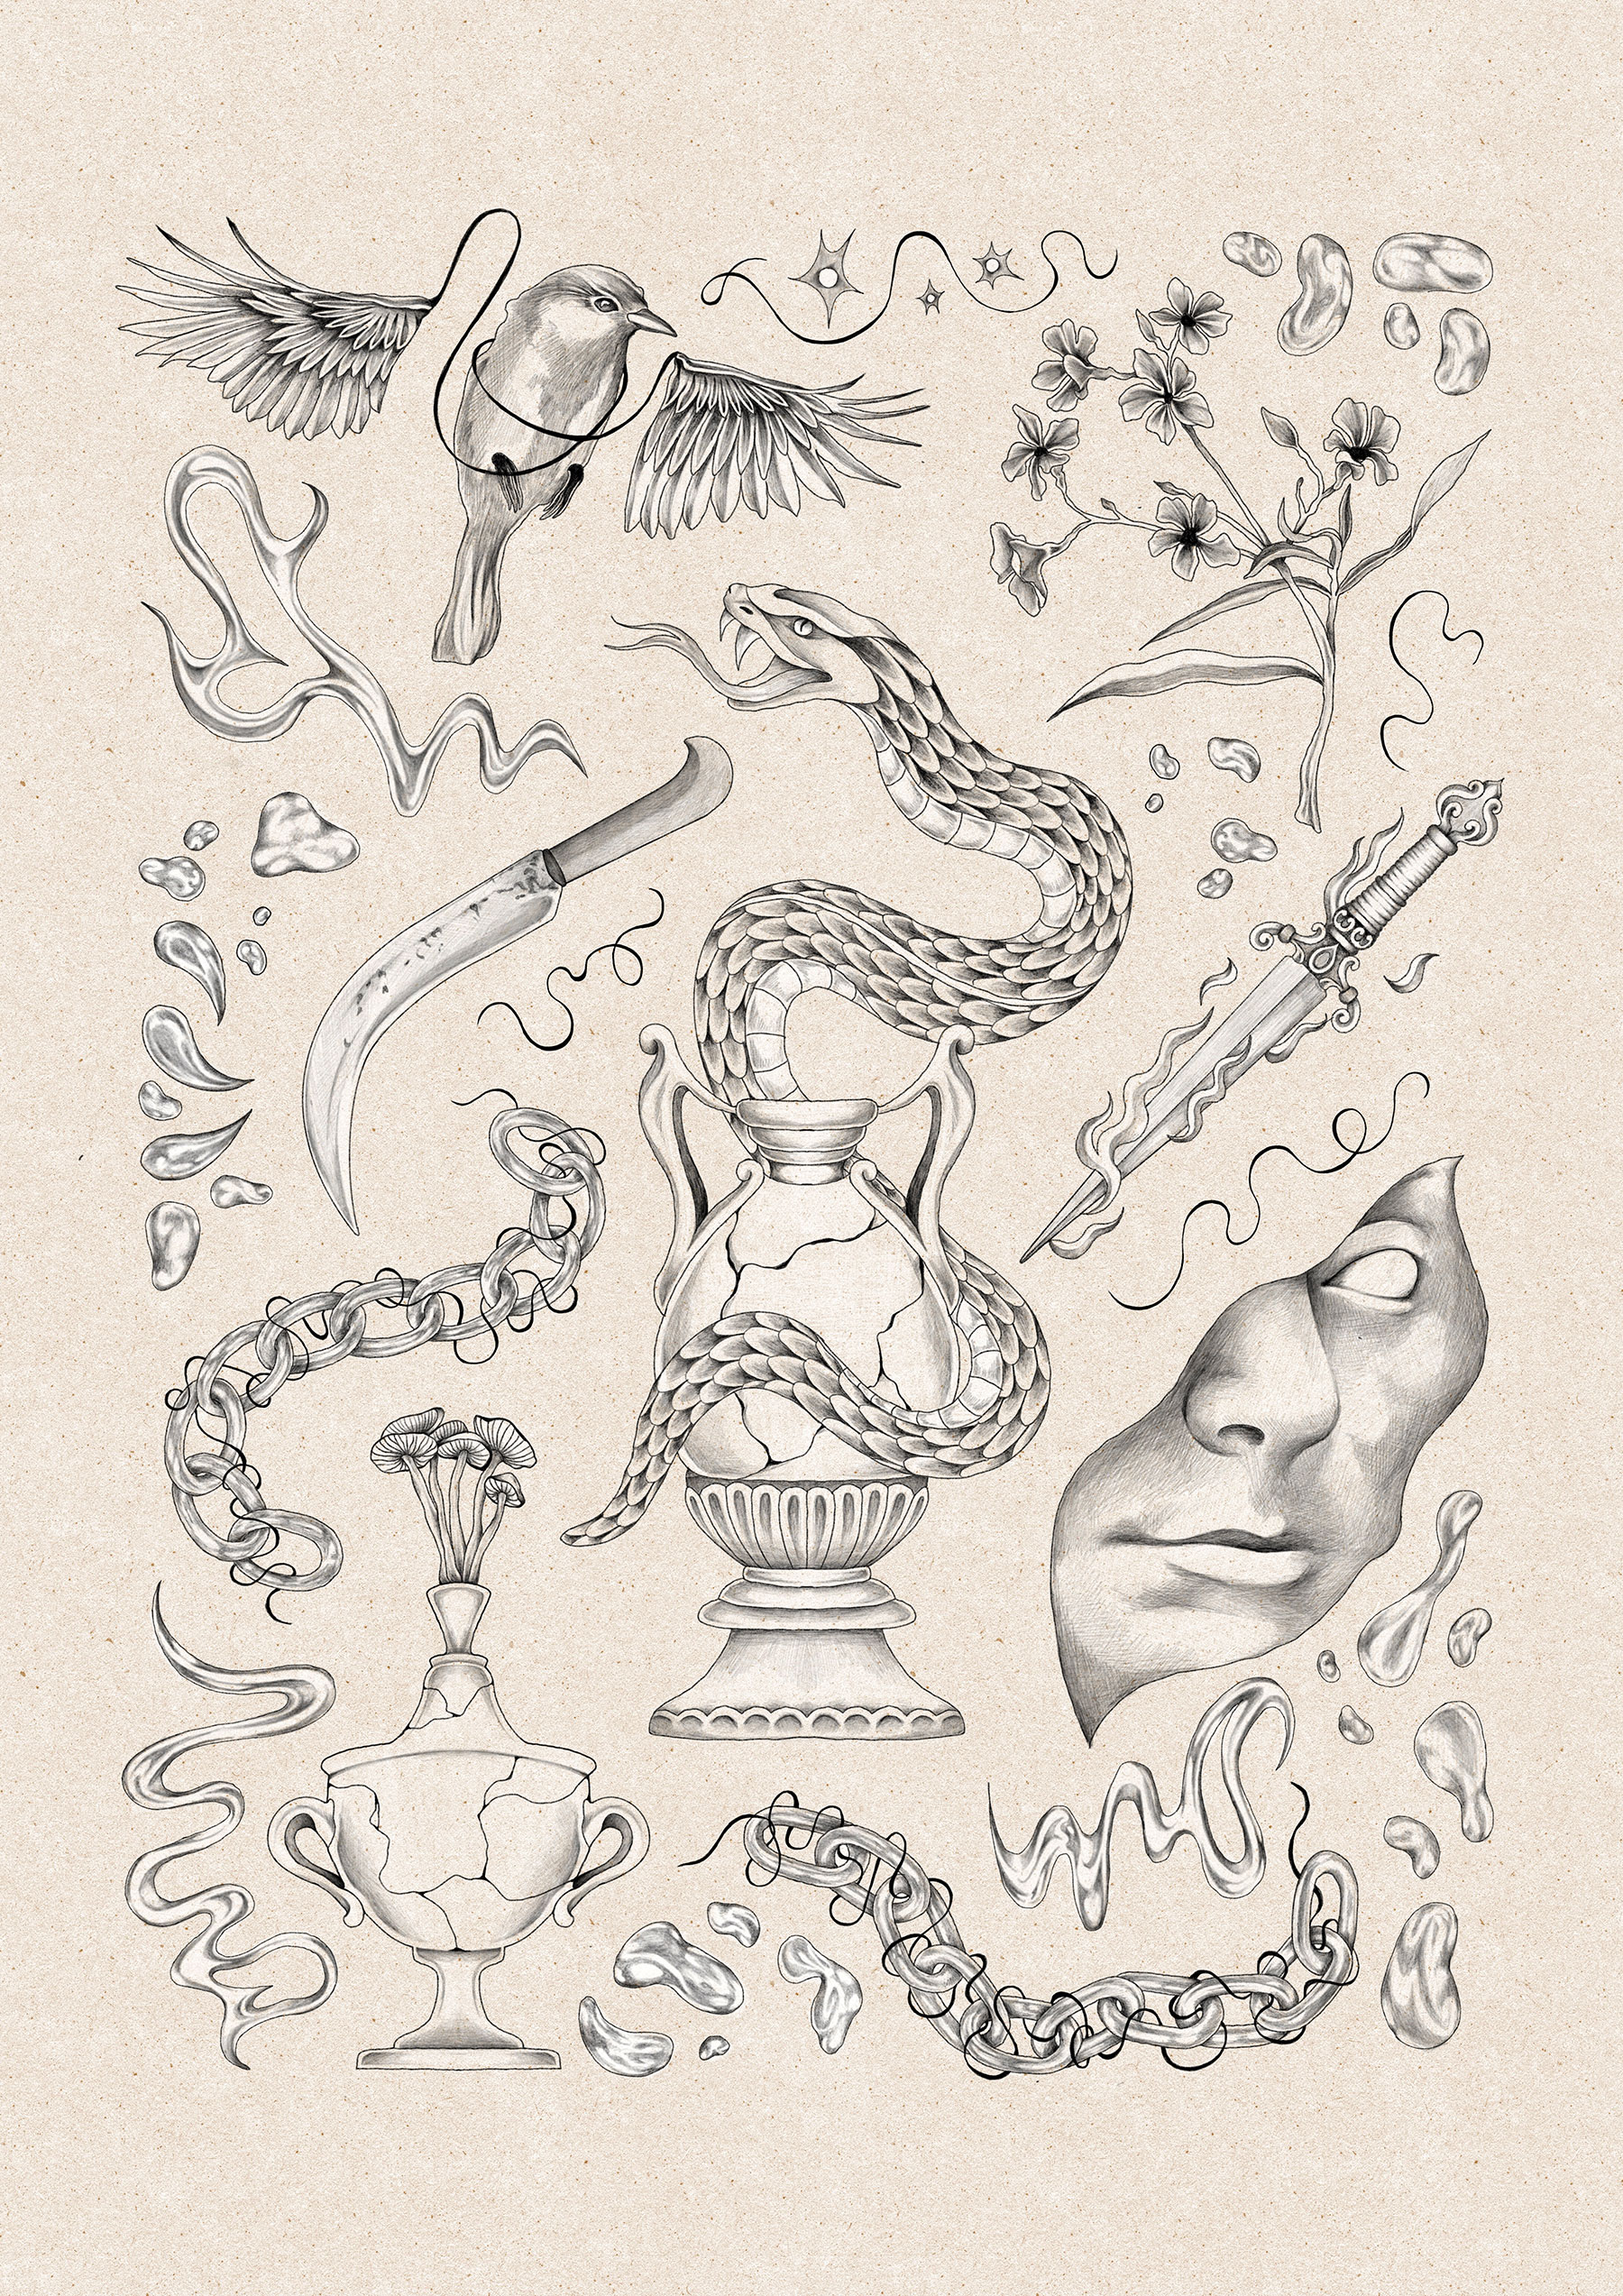 A digital tattoo flash sheet inspired by research into Wunderkammer: Cabinets of Curiosities.